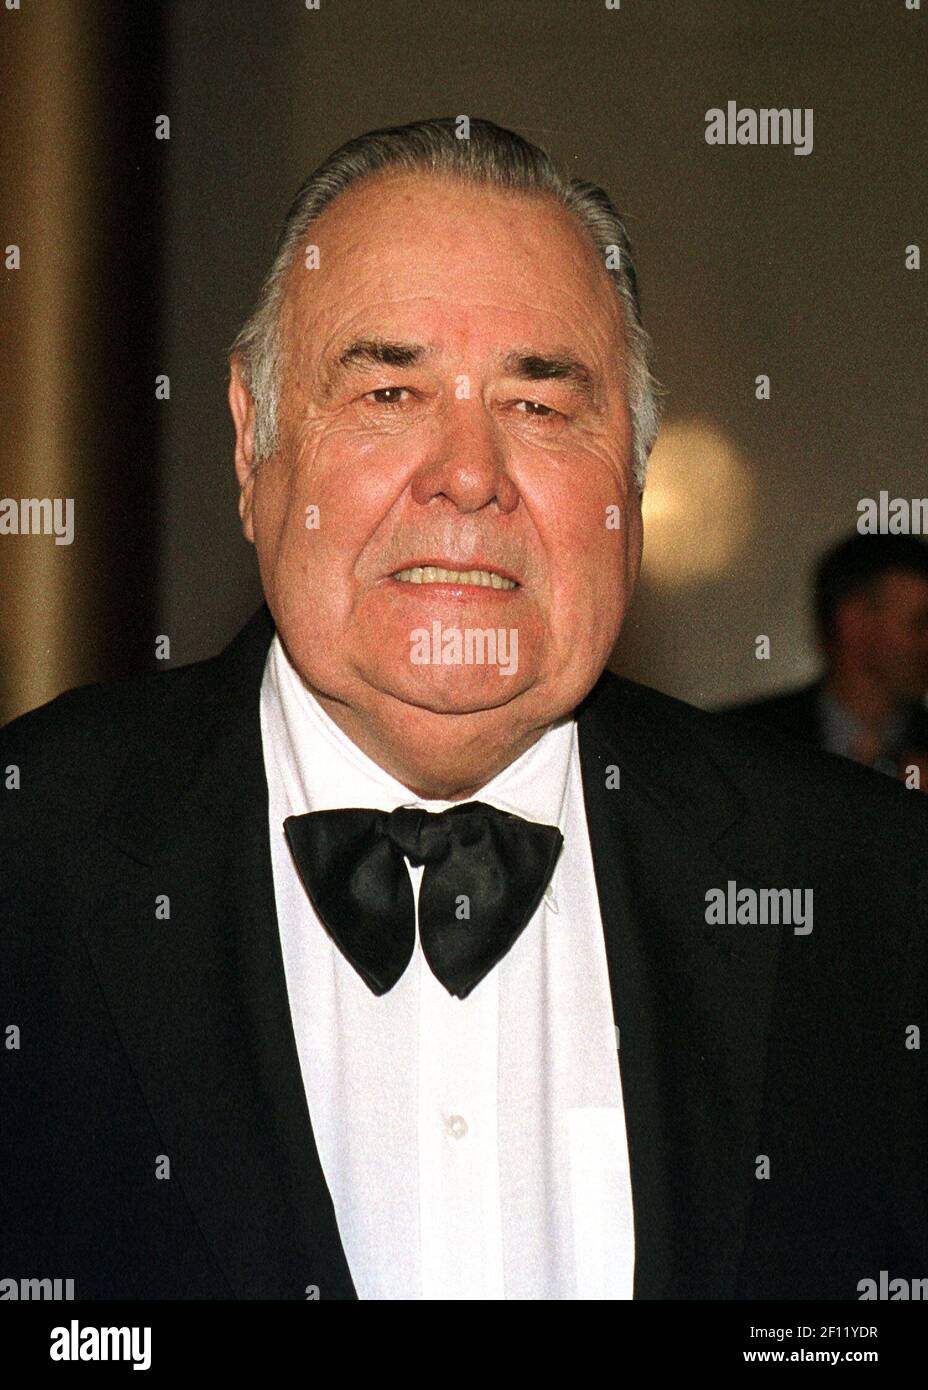 Jonathan Winters speaks to reporters as he arrives at the John F. Kennedy Center for the Performing Arts in Washington, D.C. to accept the 'Mark Twain Prize' for comedy on October 20, 1999. Winters passed away on April 11, 2013 at age 87. Photo Credit: Ron Sachs/CNP/AdMedia/Sipa USA Stock Photo